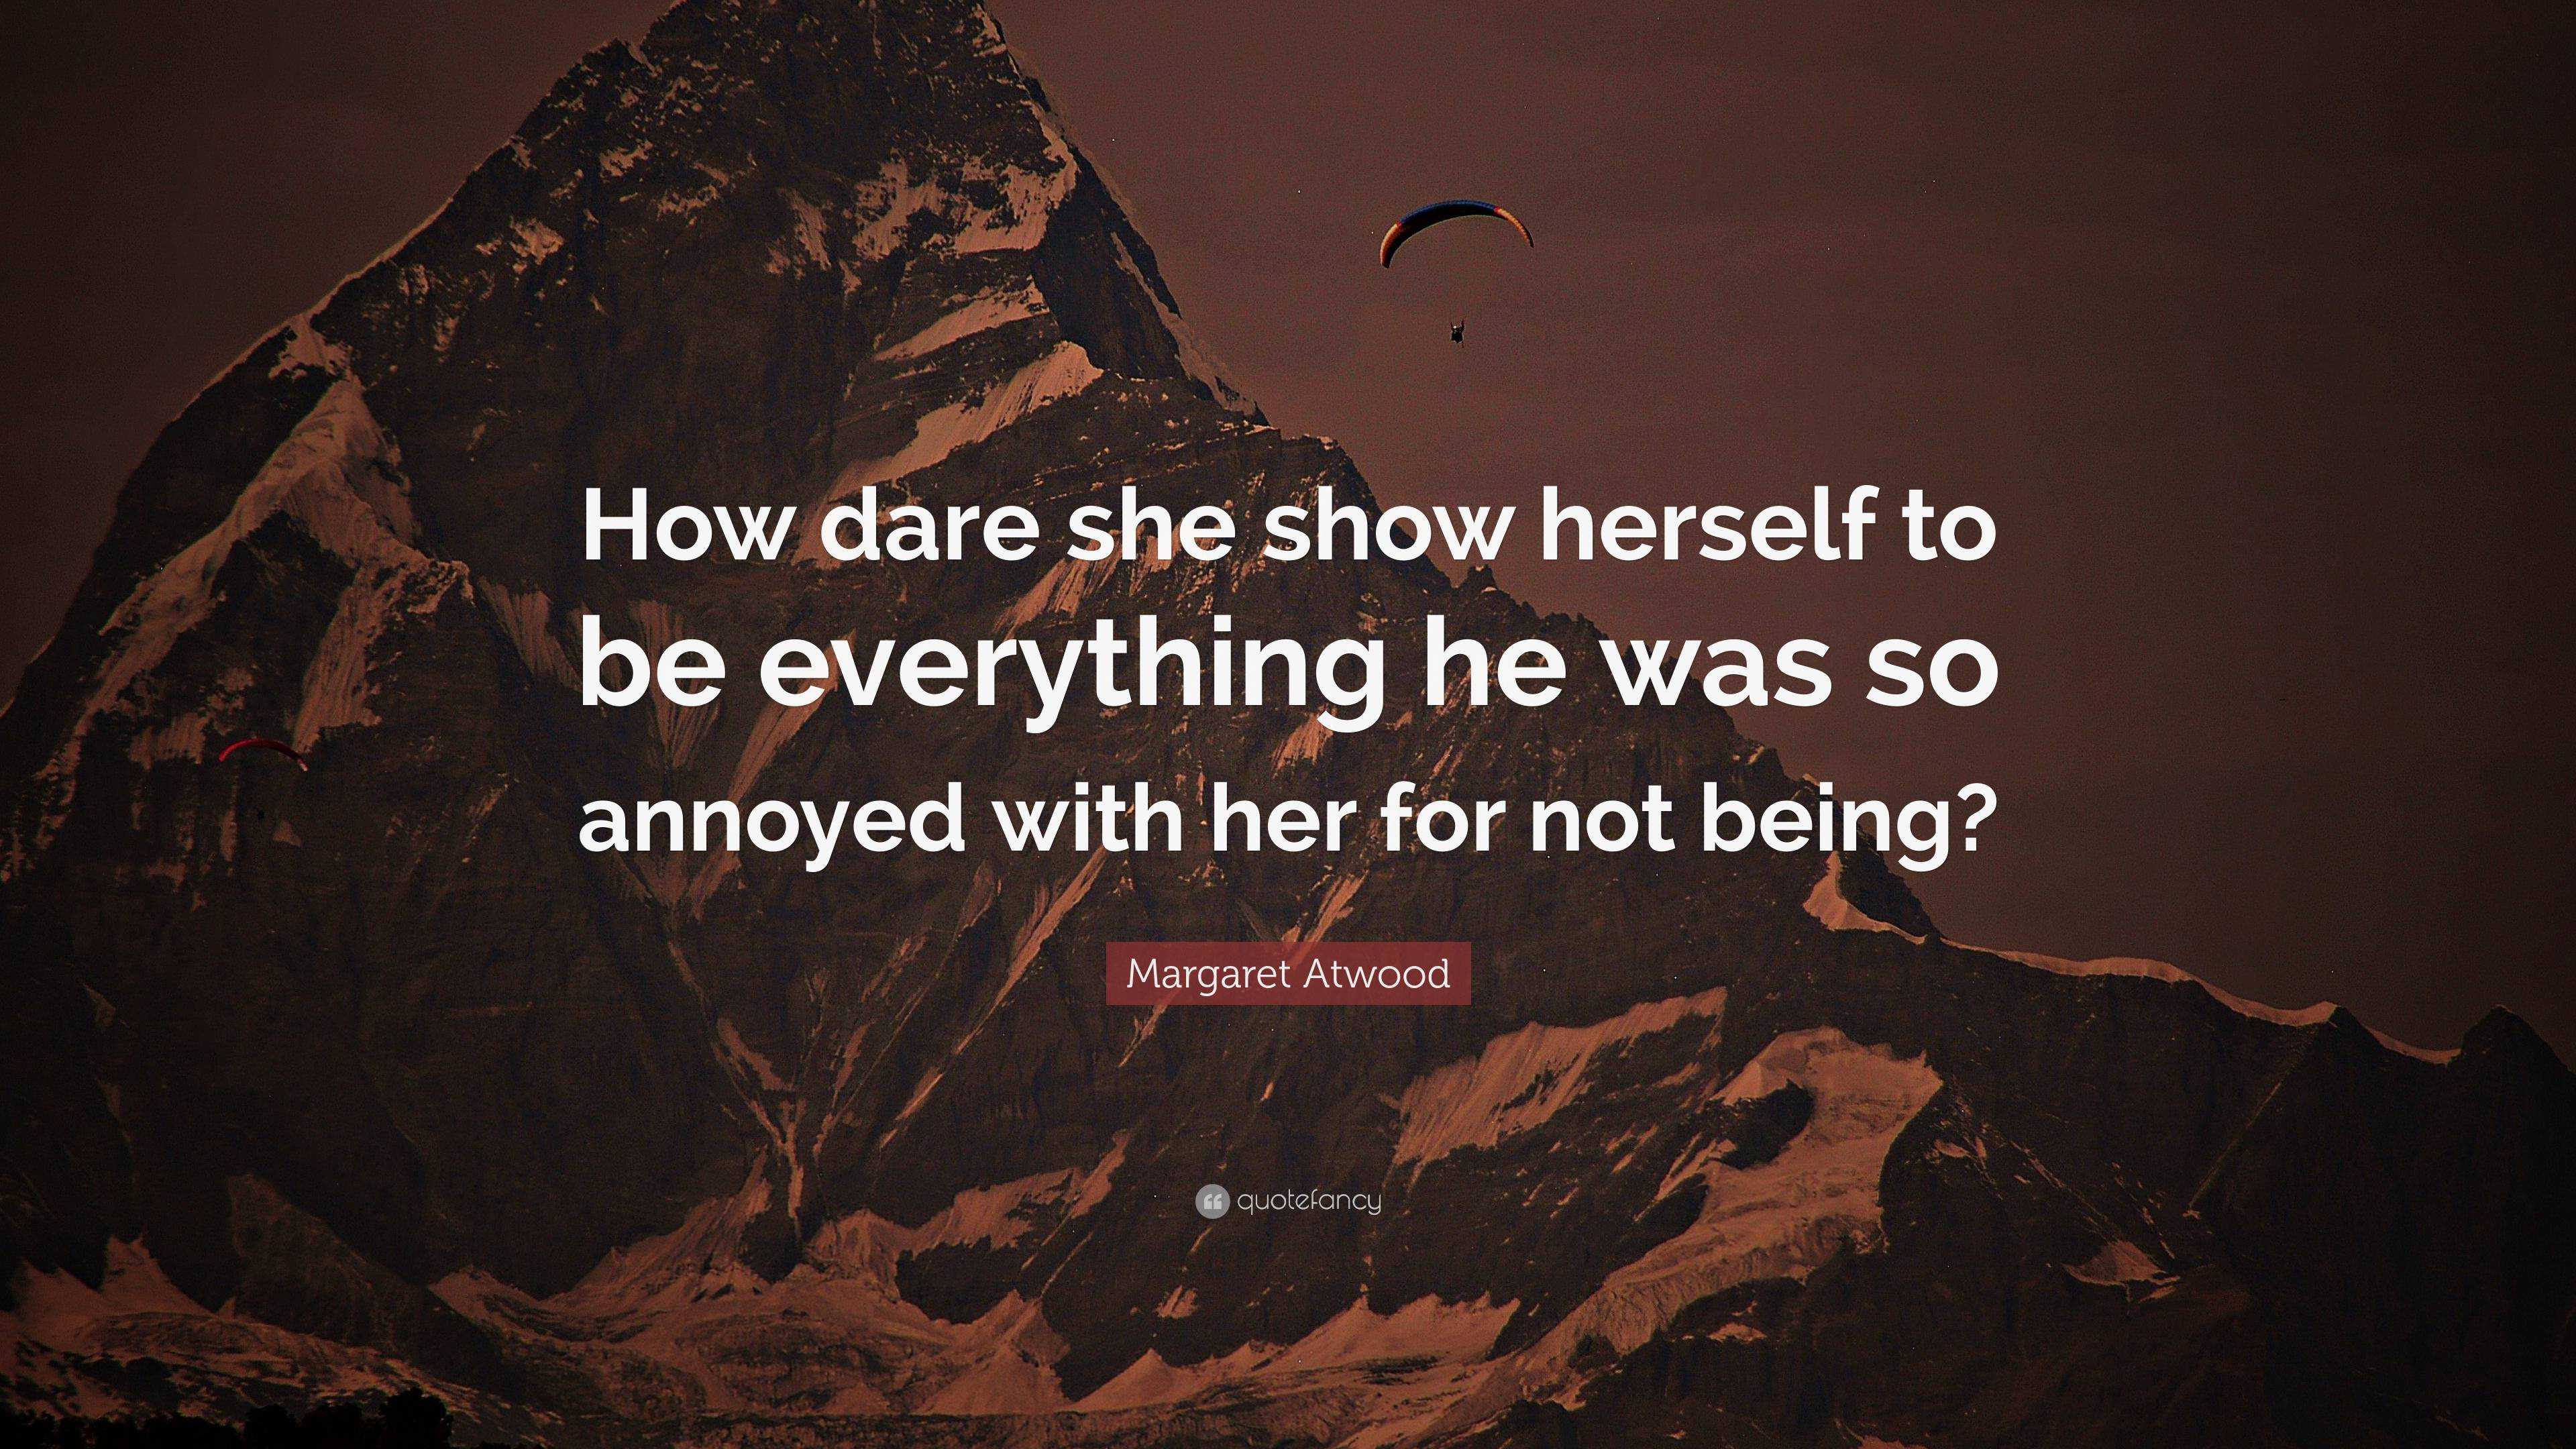 Margaret Atwood Quote: “How dare she show herself to be everything he ...